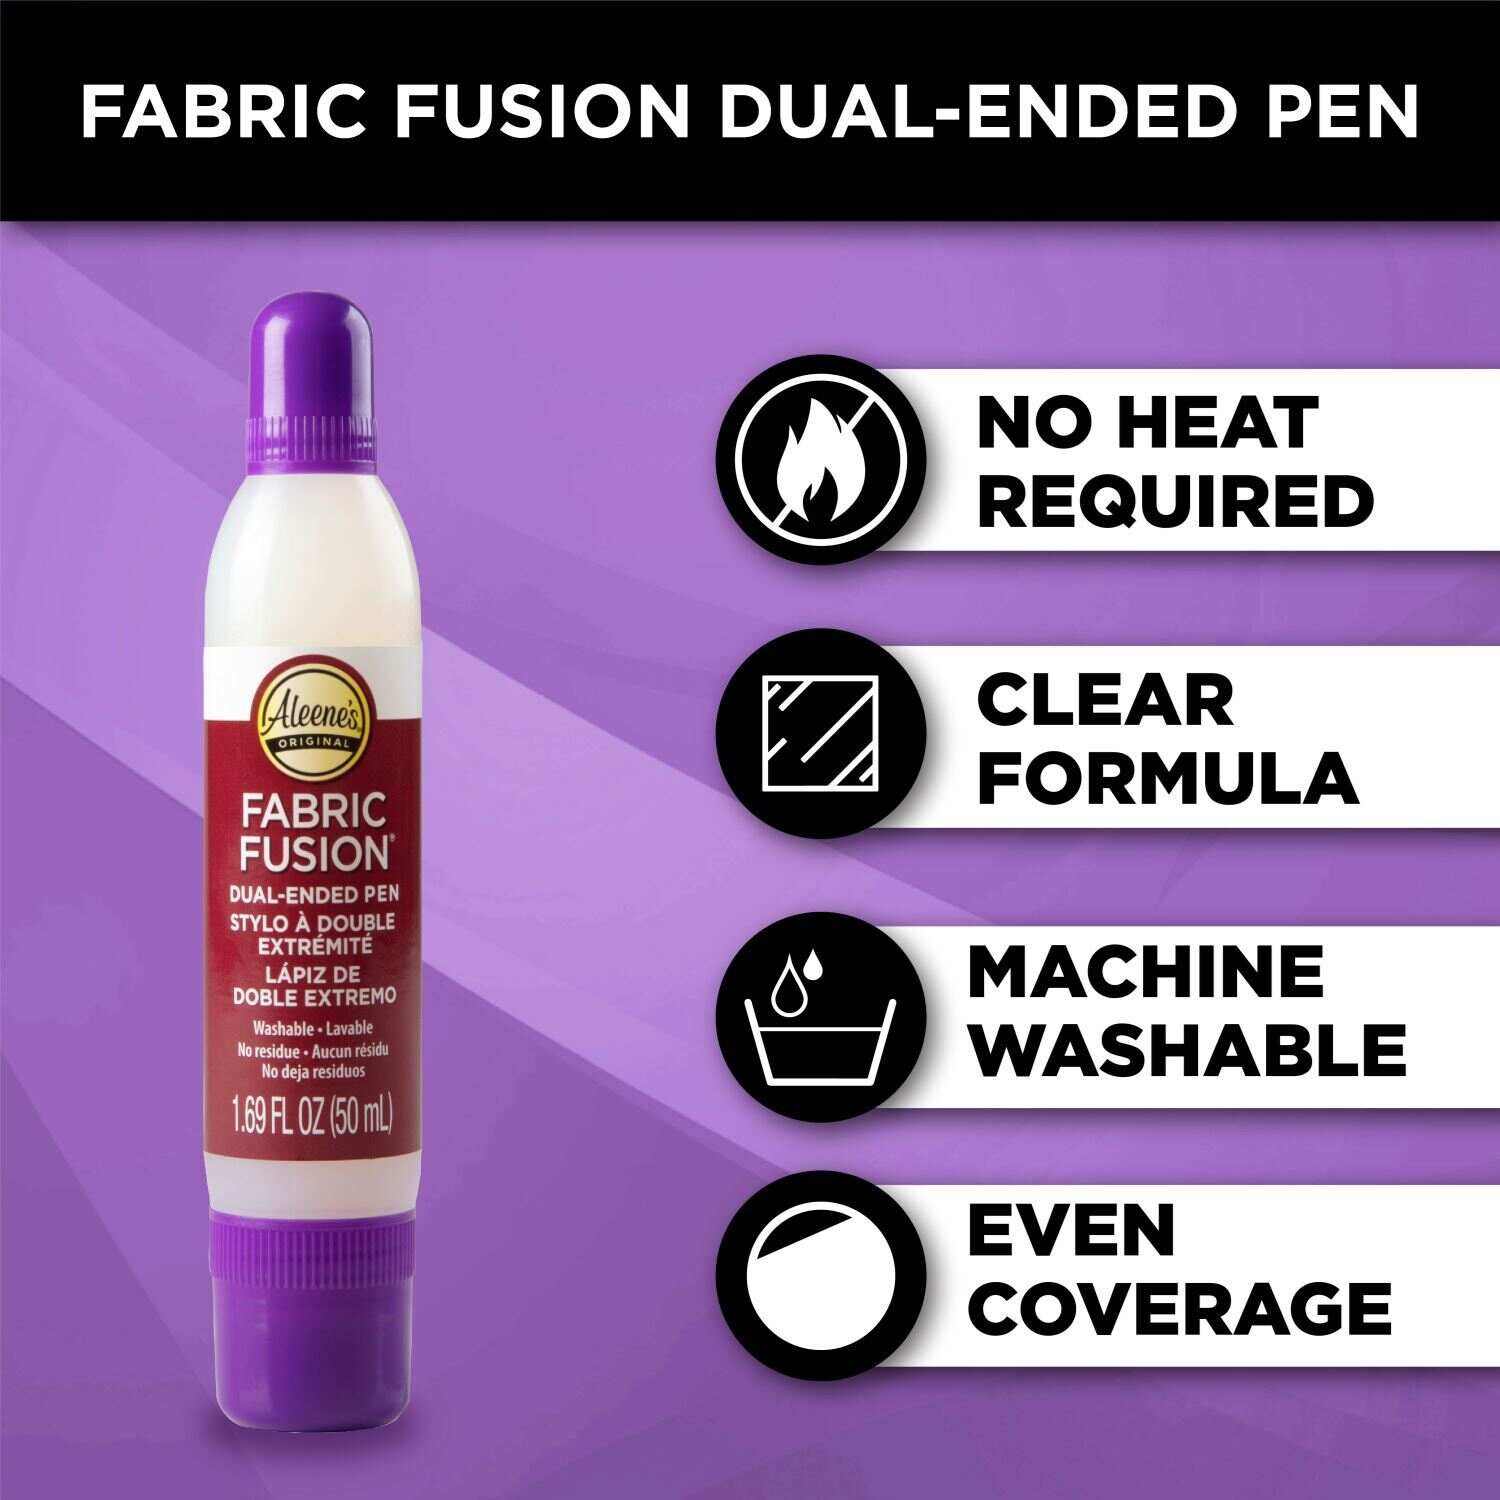 Aleene's Fabric Fusion Permanent Adhesive Dual Ended Pen-1.6oz - 3 Pack